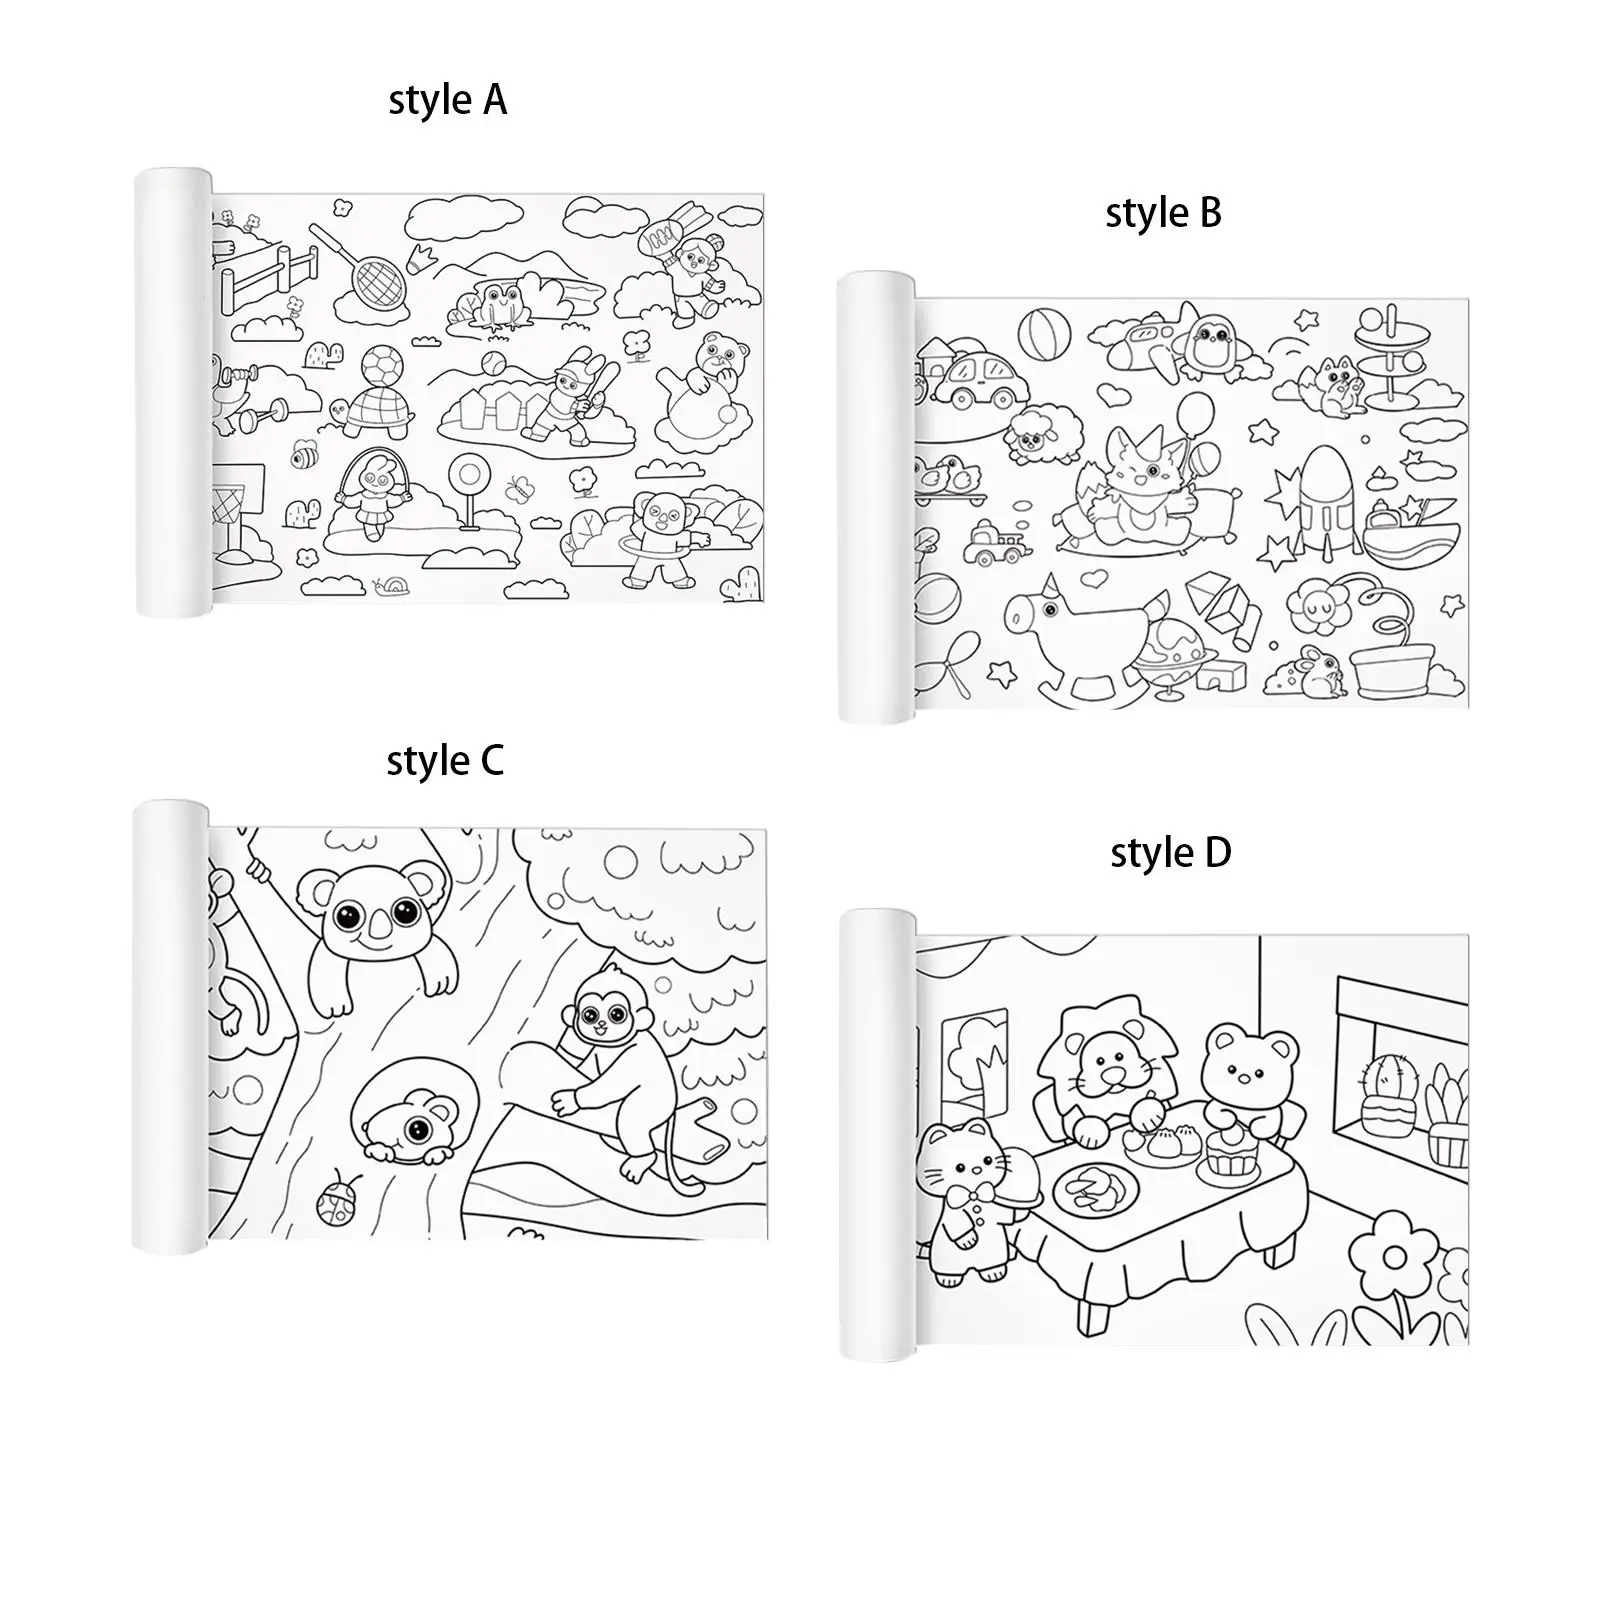 Large Children Colouring Roll Coloring Poster Painting Art Supplies Children